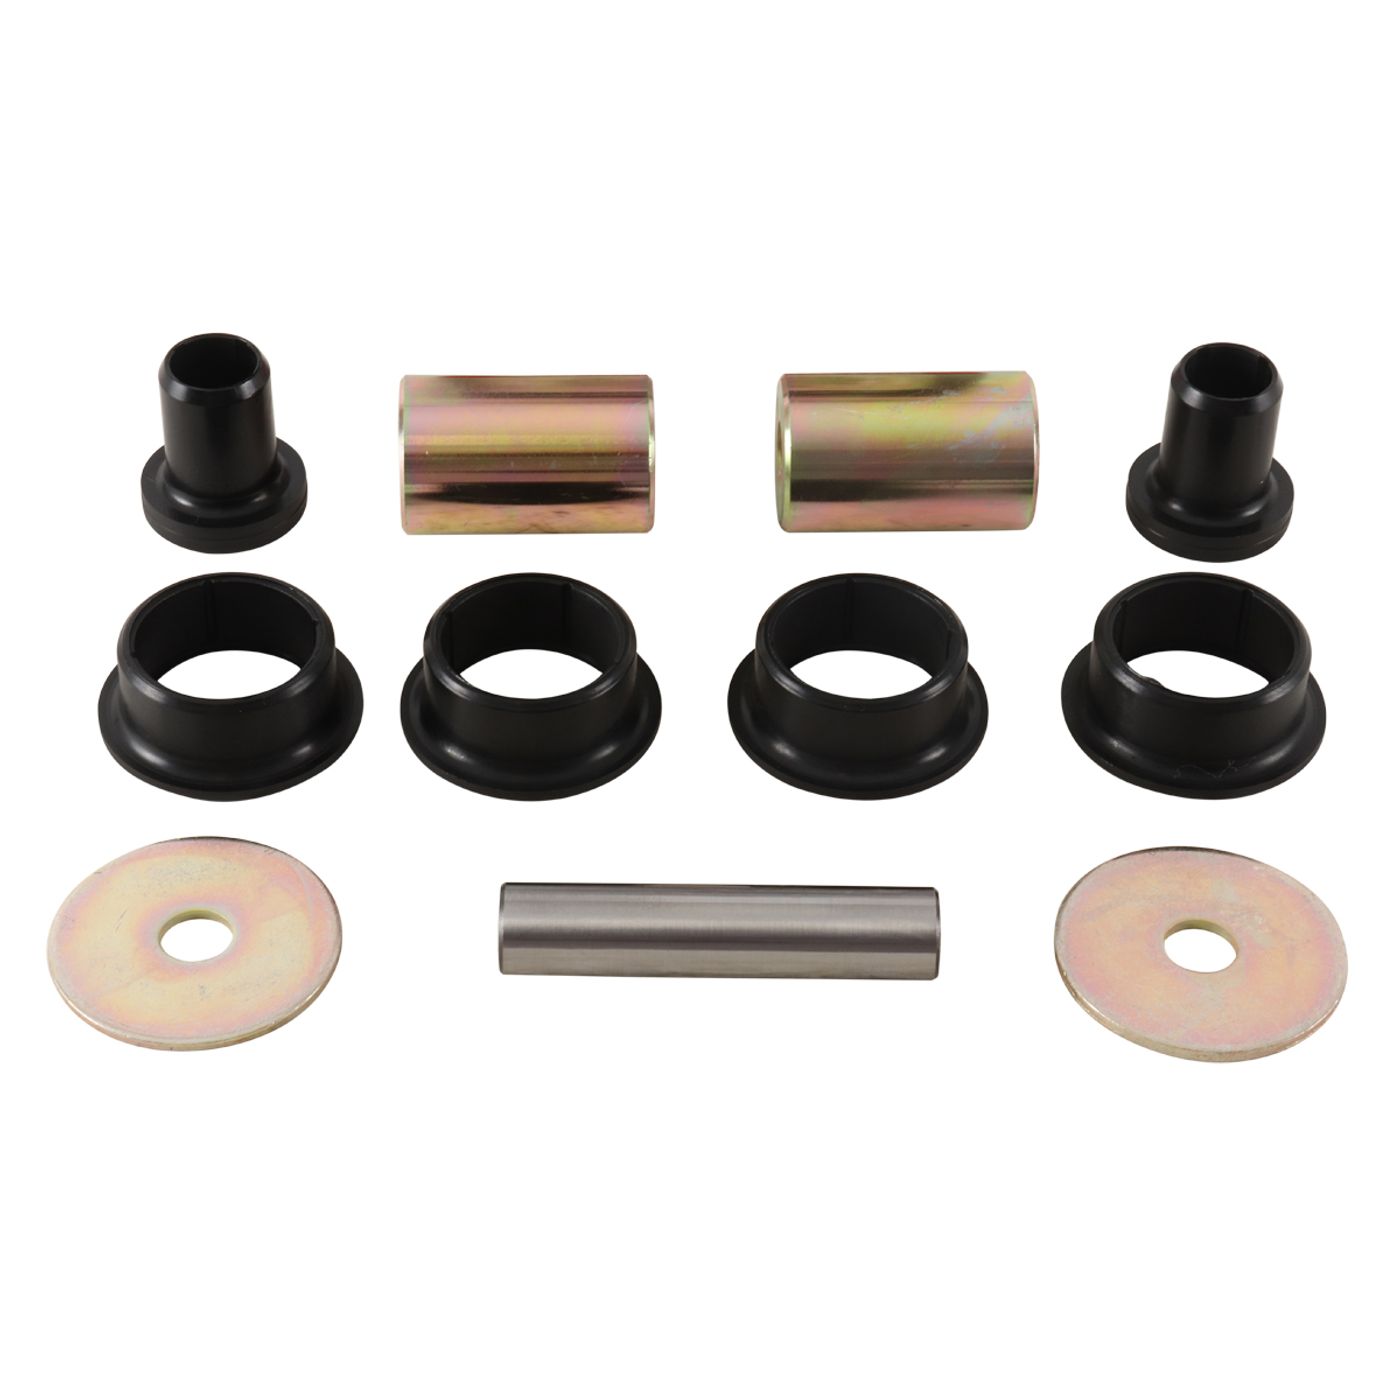 Wrp Rear Ind. Suspension Kits - WRP501212 image